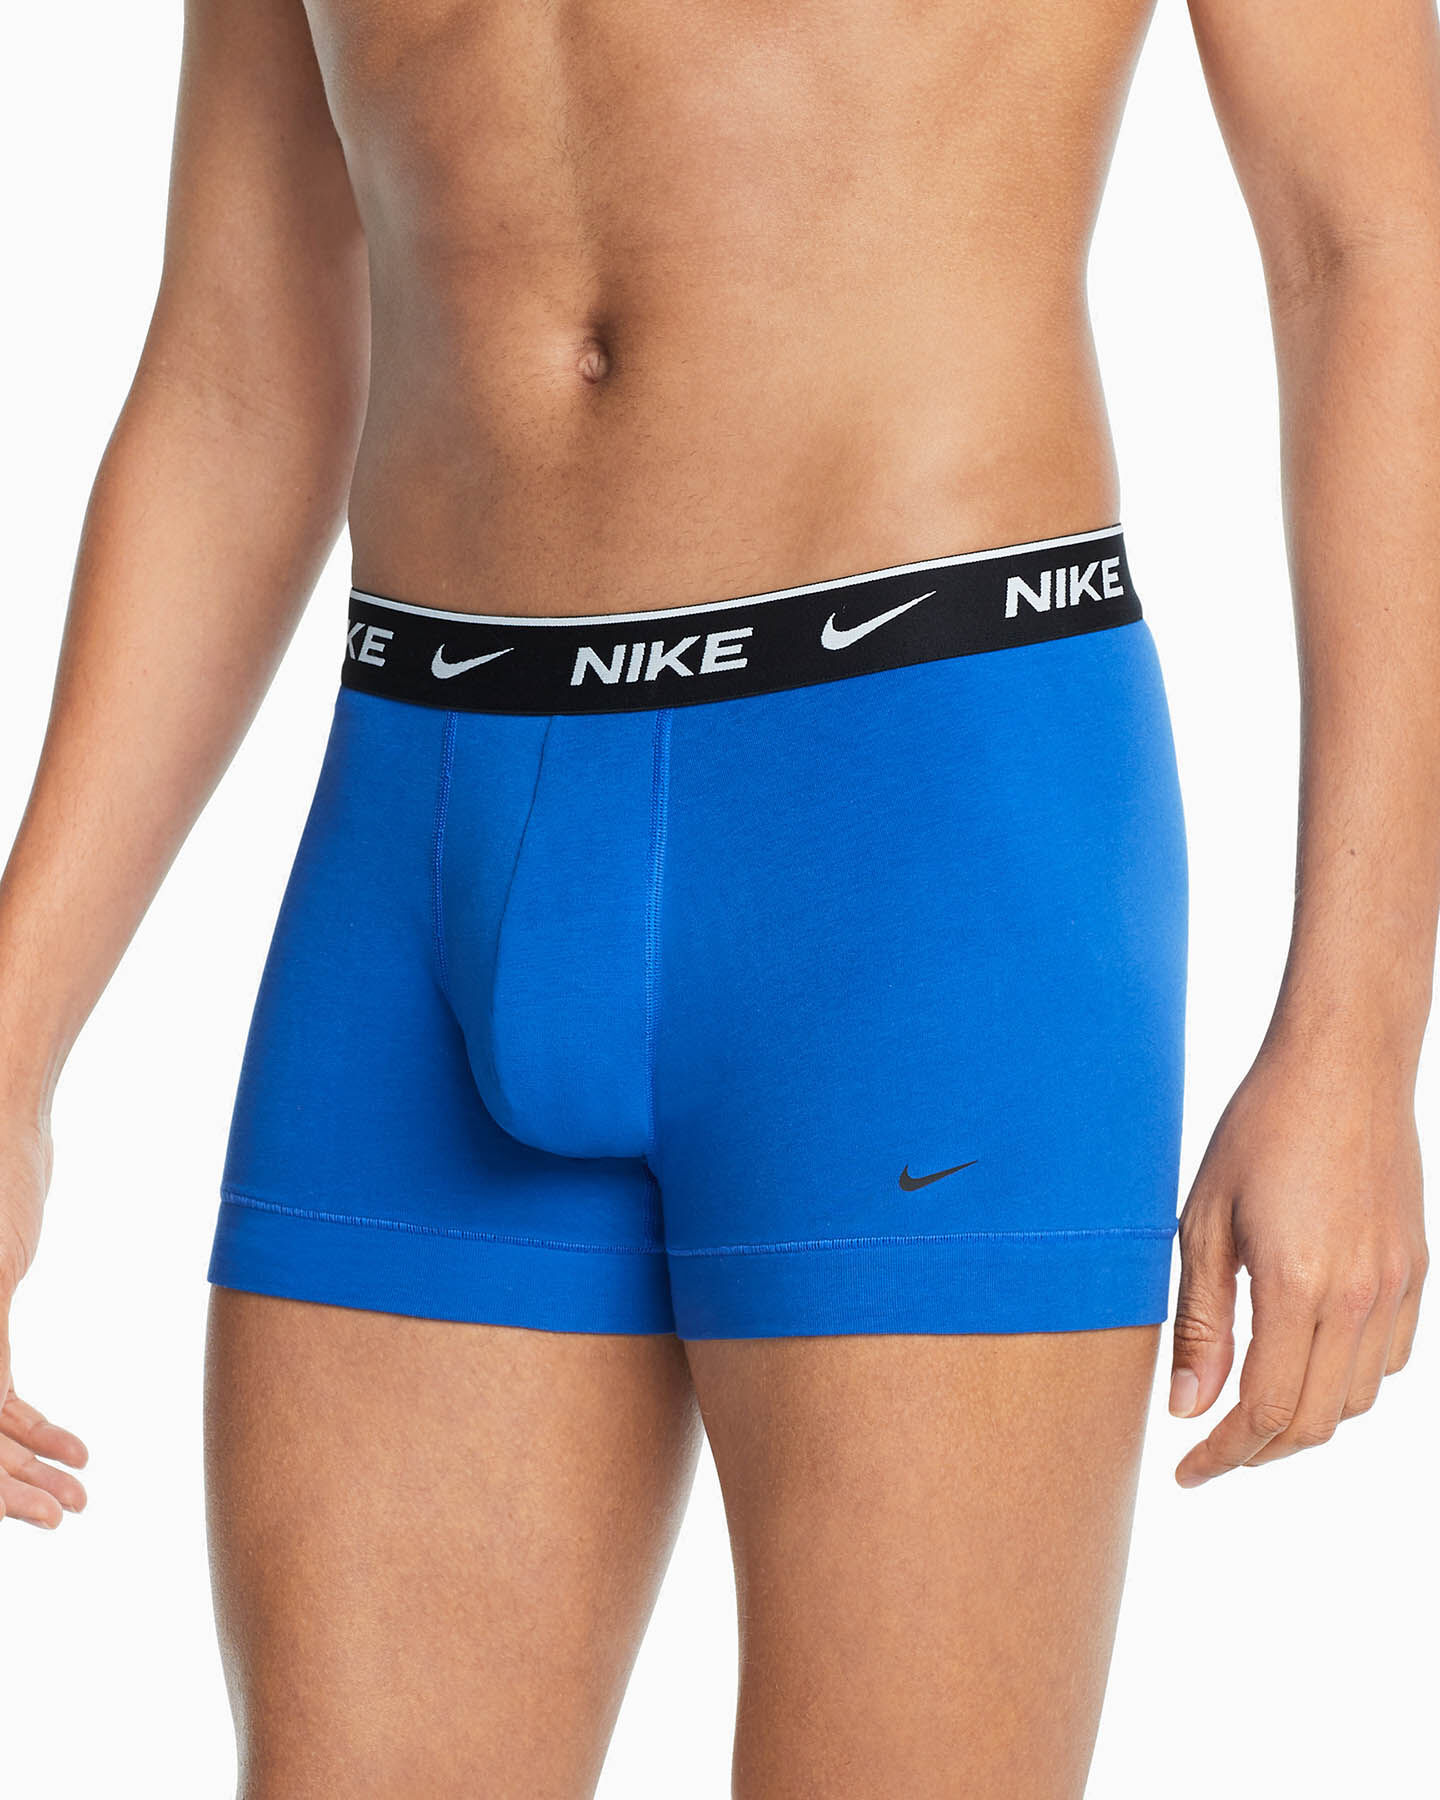  Intimo NIKE 2PACK BOXER EVERYDAY M S4099900|WNC|L scatto 1